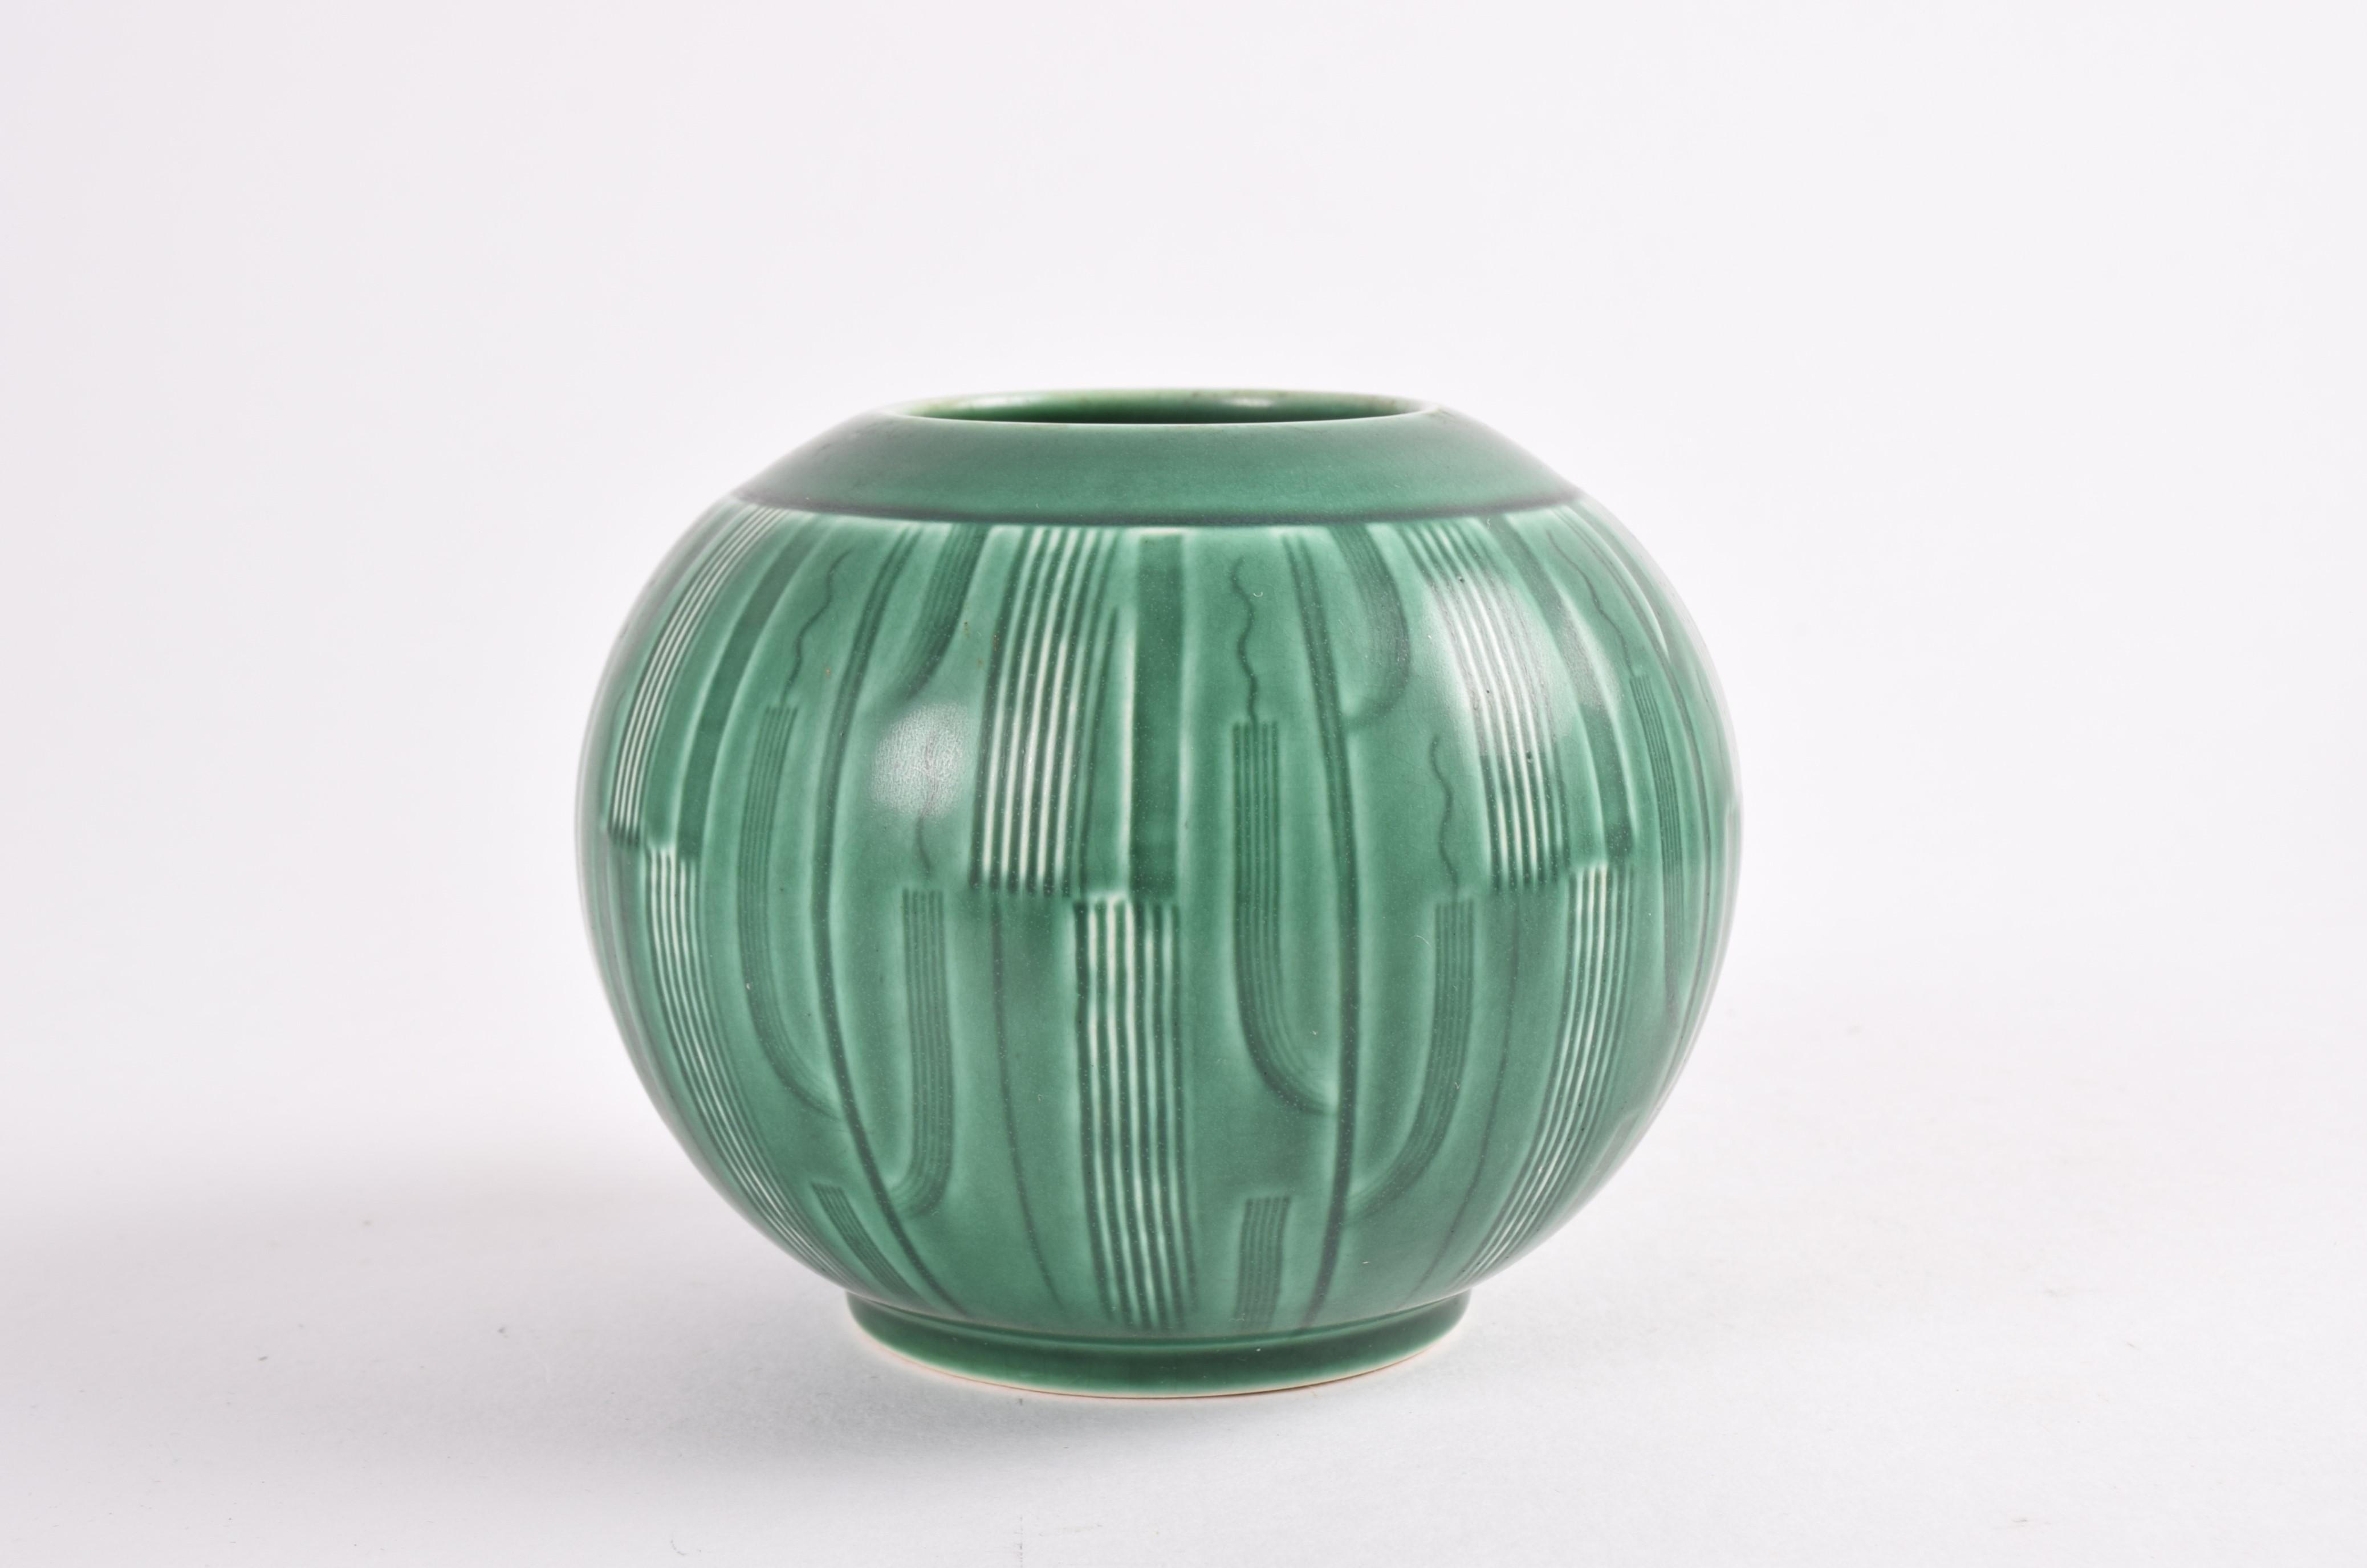 Danish Art Deco vase by Nils Thorsson for Aluminia (later brandname Royal Copenhagen). The vase is from the 